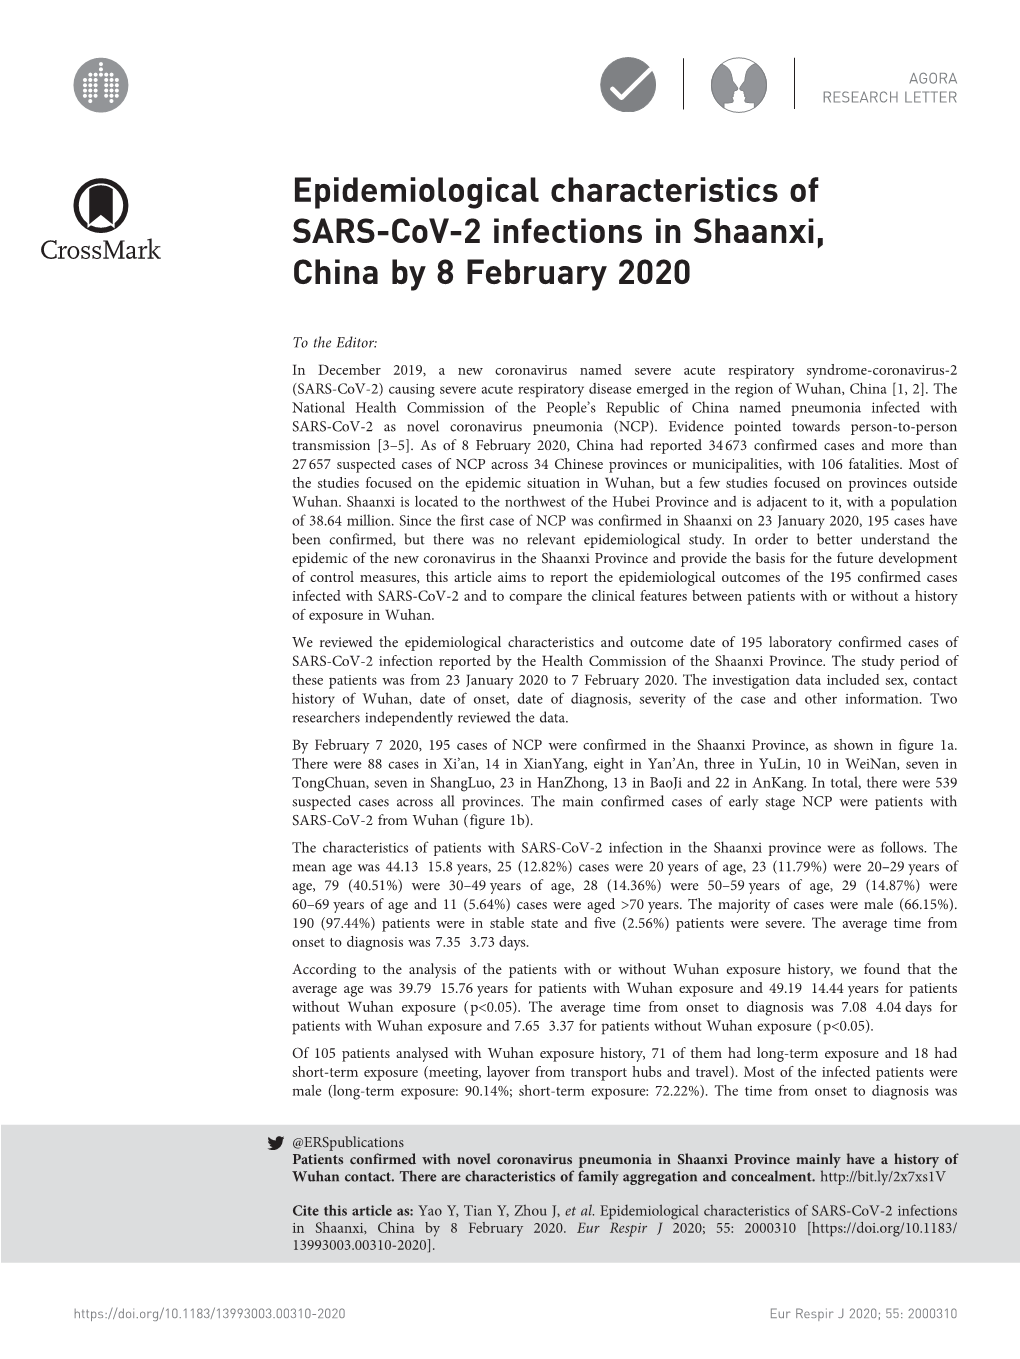 Epidemiological Characteristics of SARS-Cov-2 Infections in Shaanxi, China by 8 February 2020